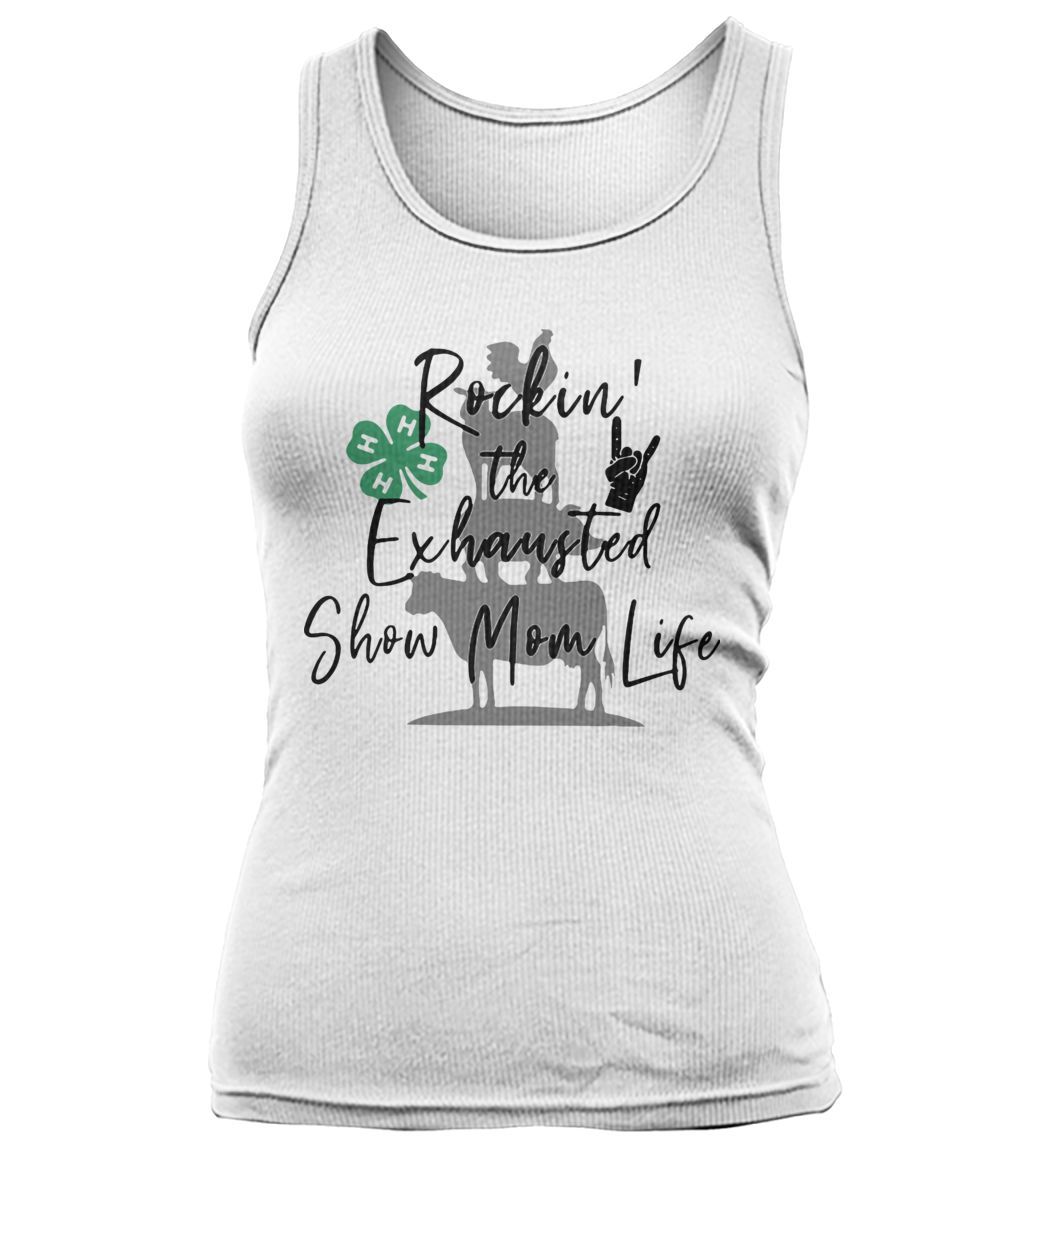 Barbecue with cow pig and chicken rockin' the exhausted show mom life women's tank top